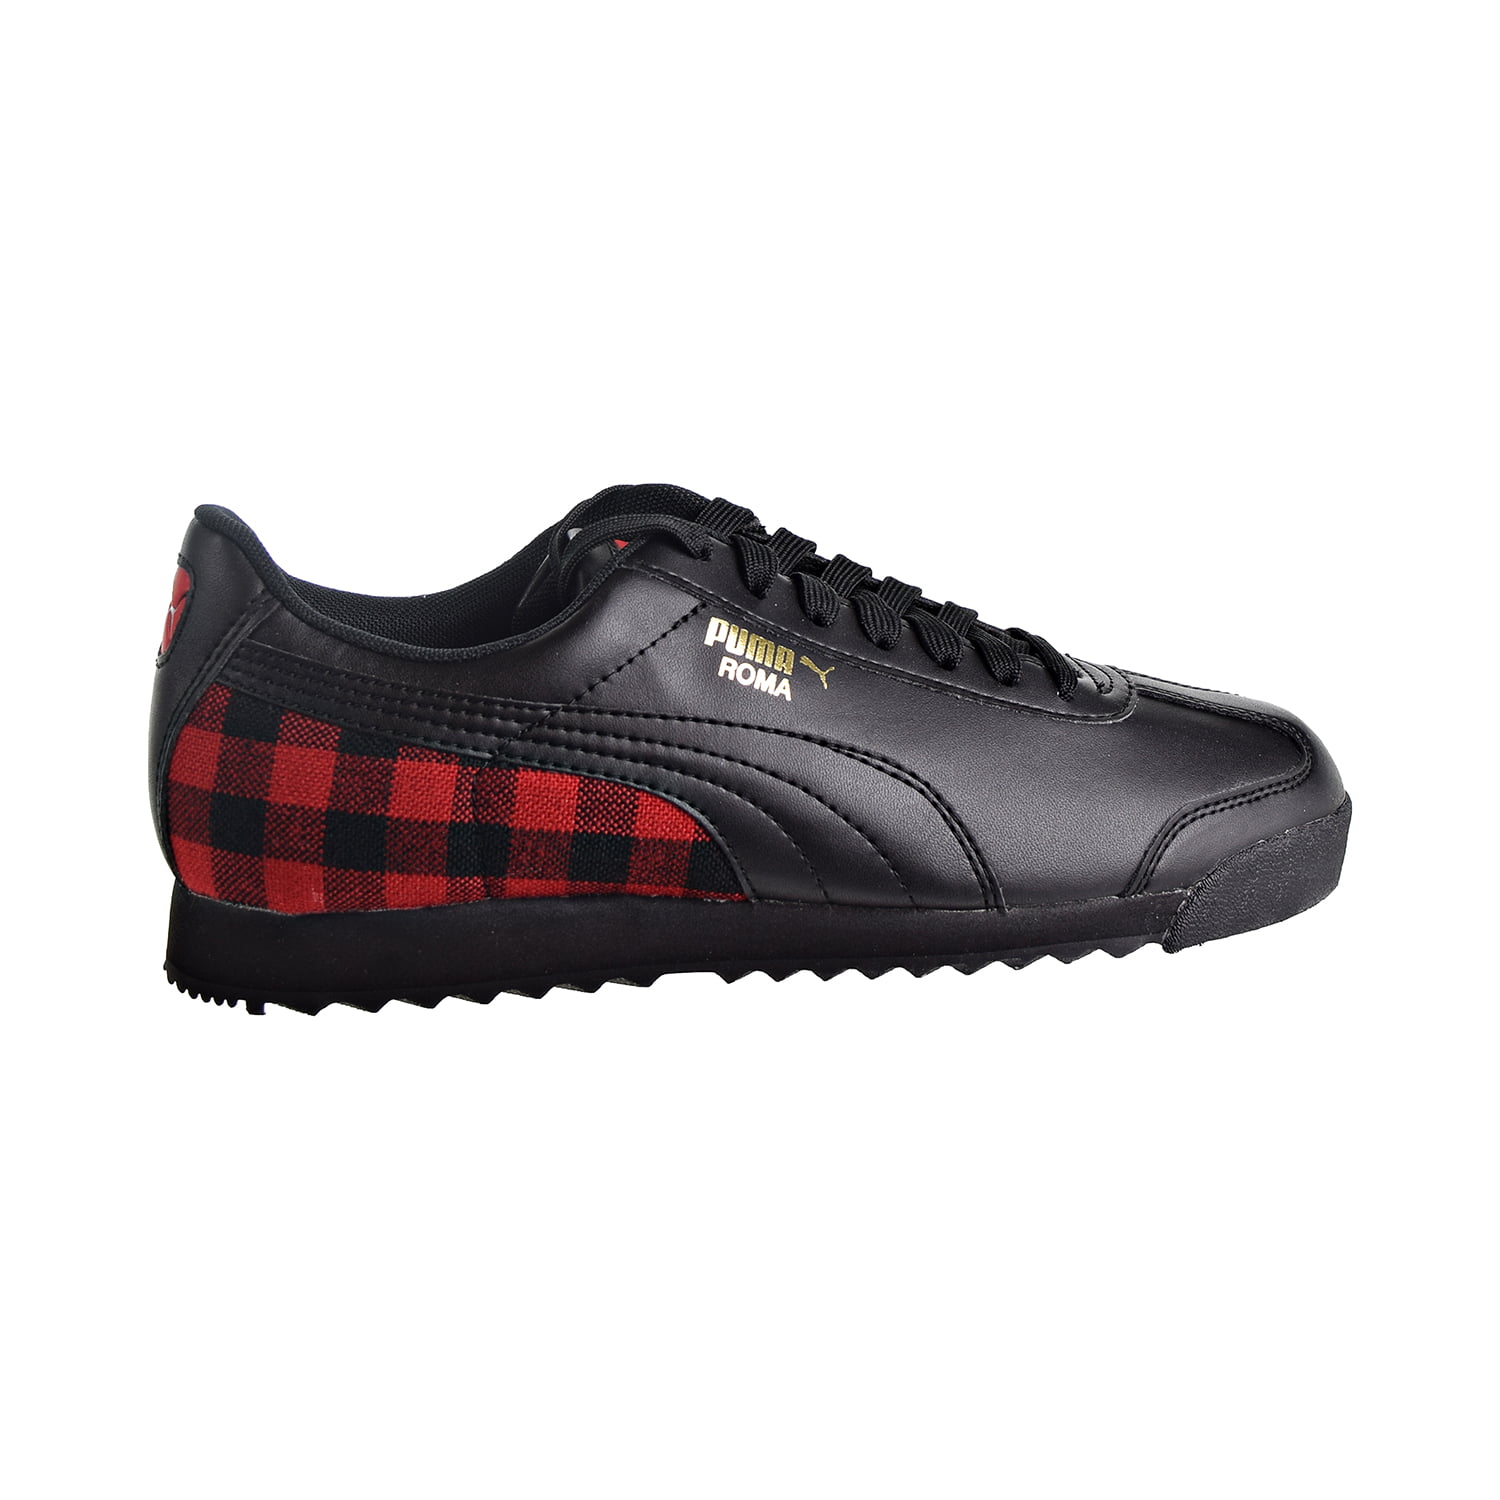 Puma Roma Leather Flannel Men's Shoes 